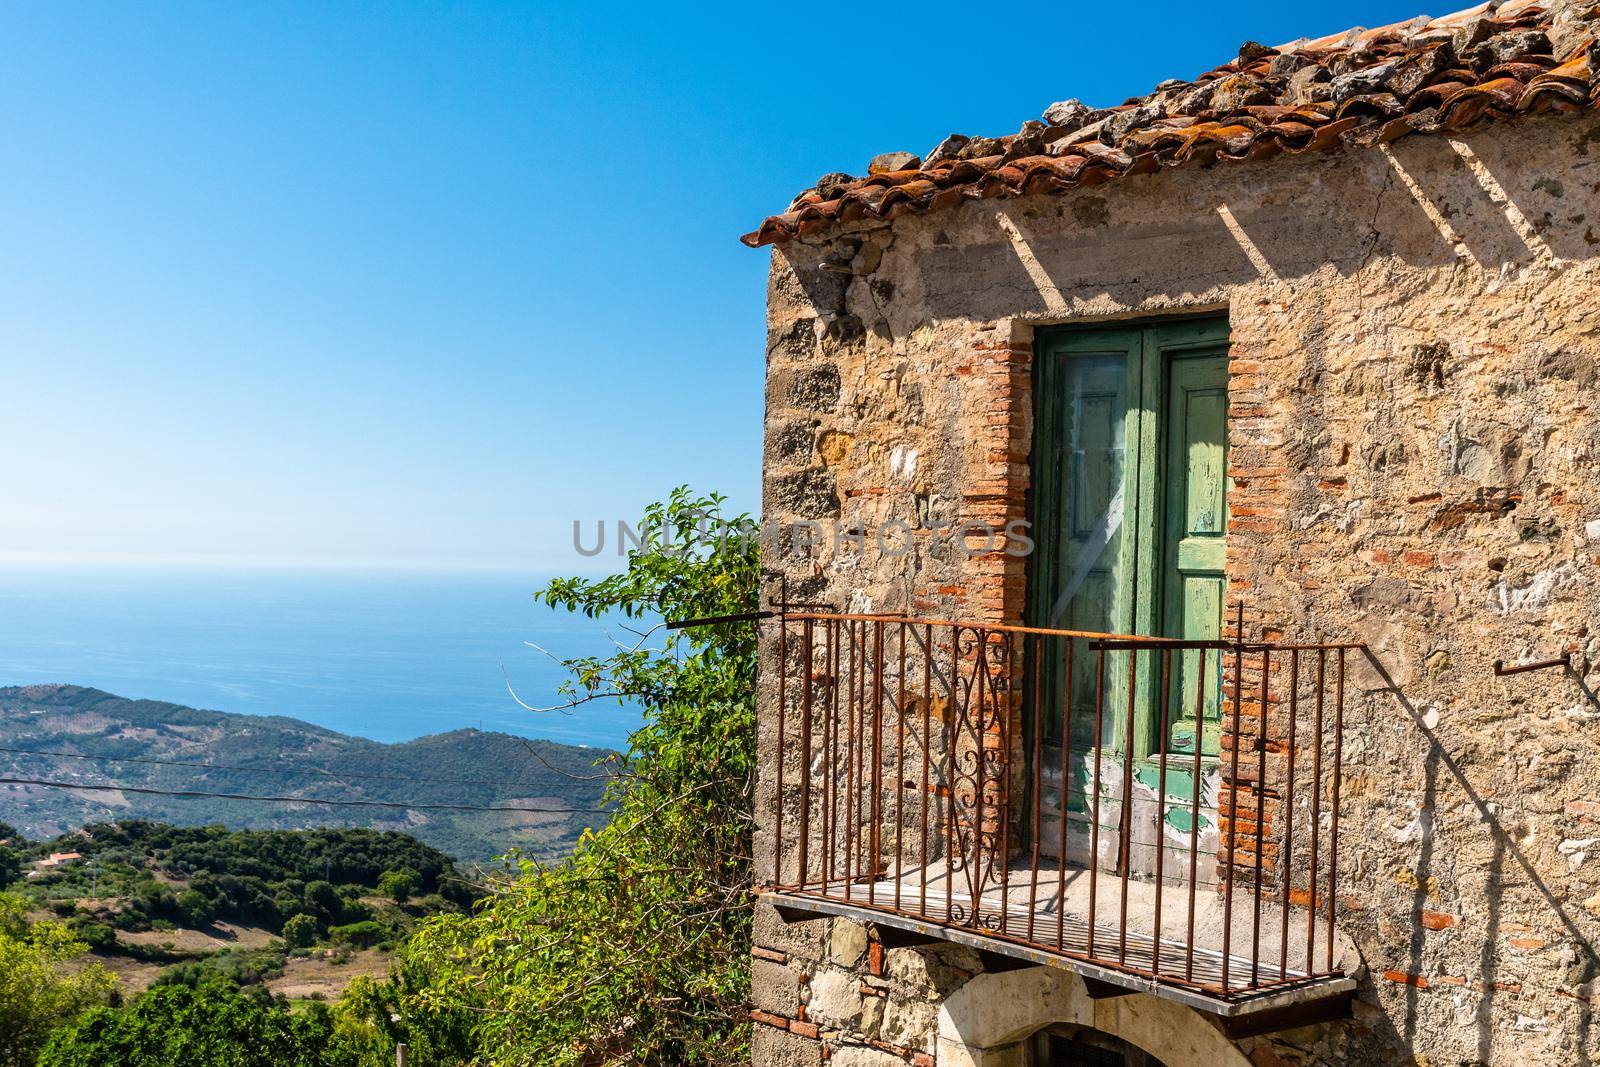 Balcony of an old house with view on the mediterranean sea, Sicily, Italy by mauricallari